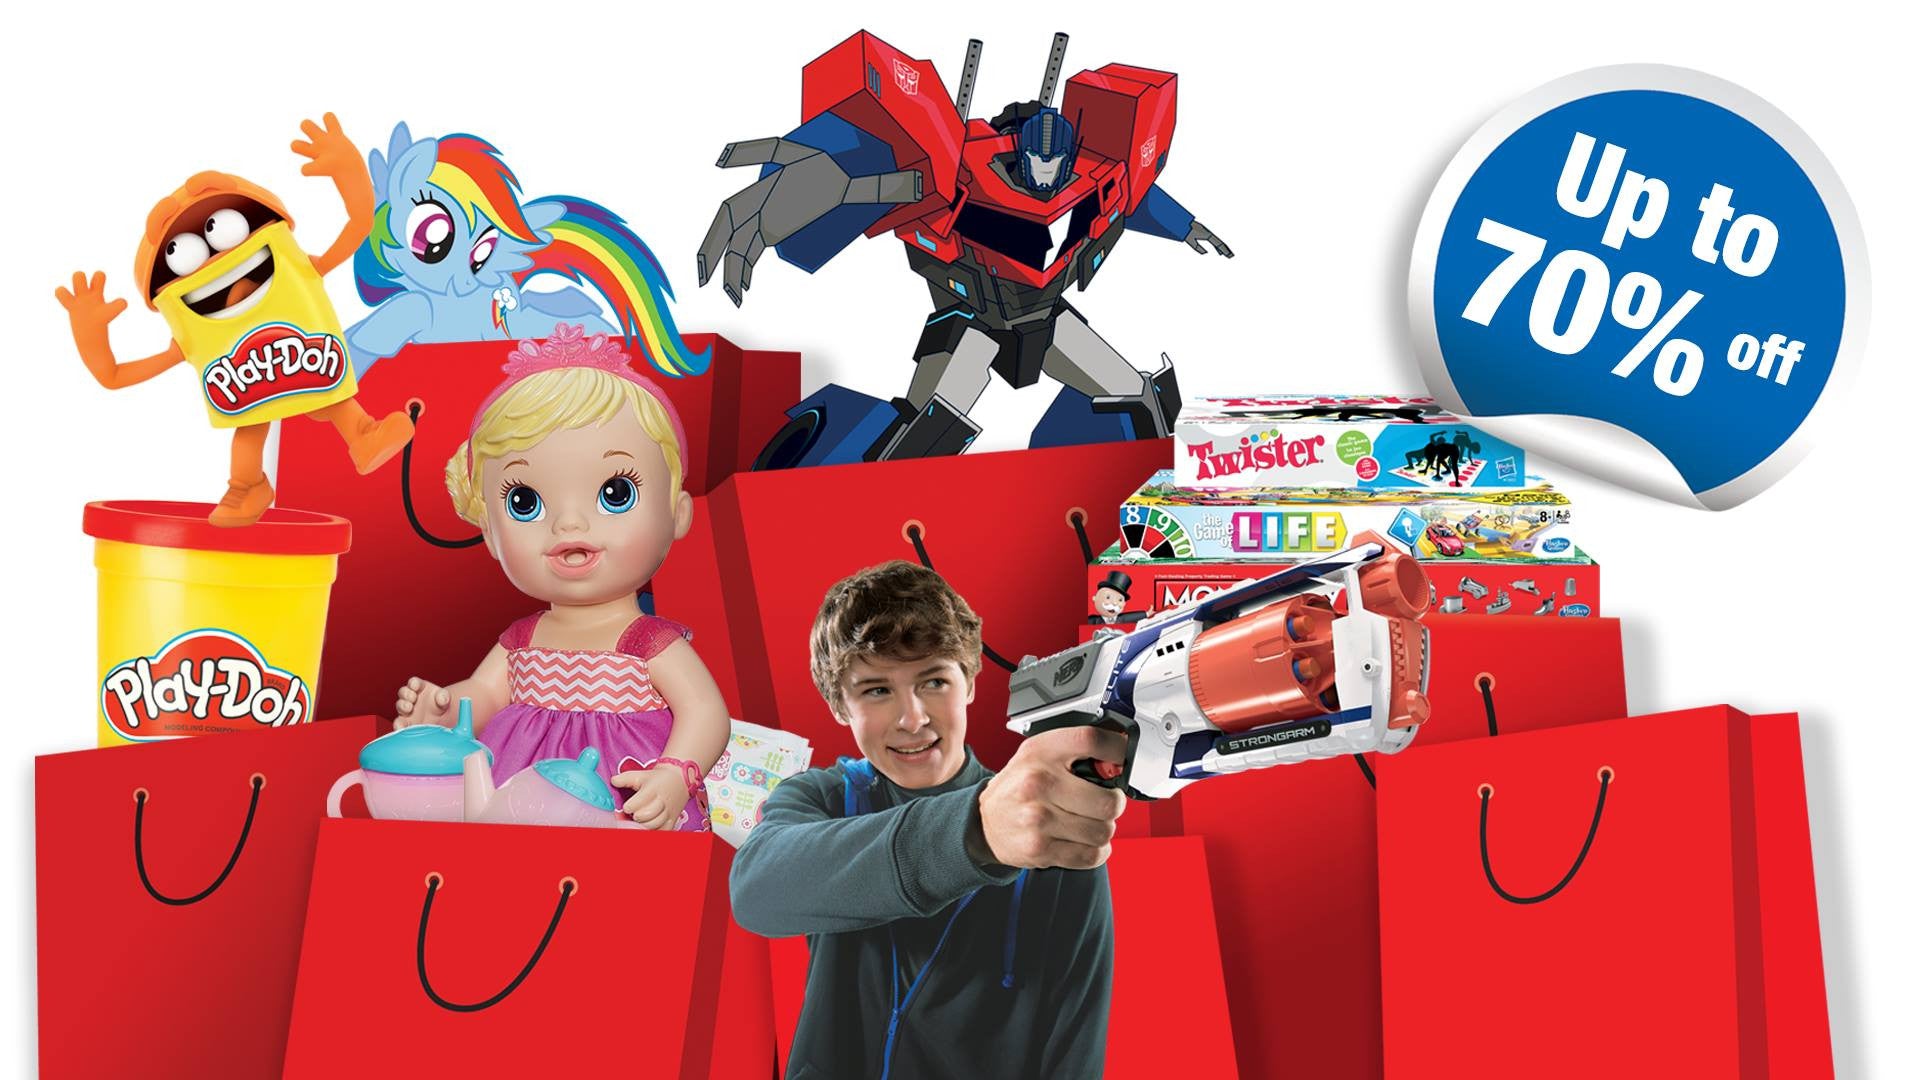 Things to do this Weekend - Xmas Shopping @ Hasbro Warehouse Sale!